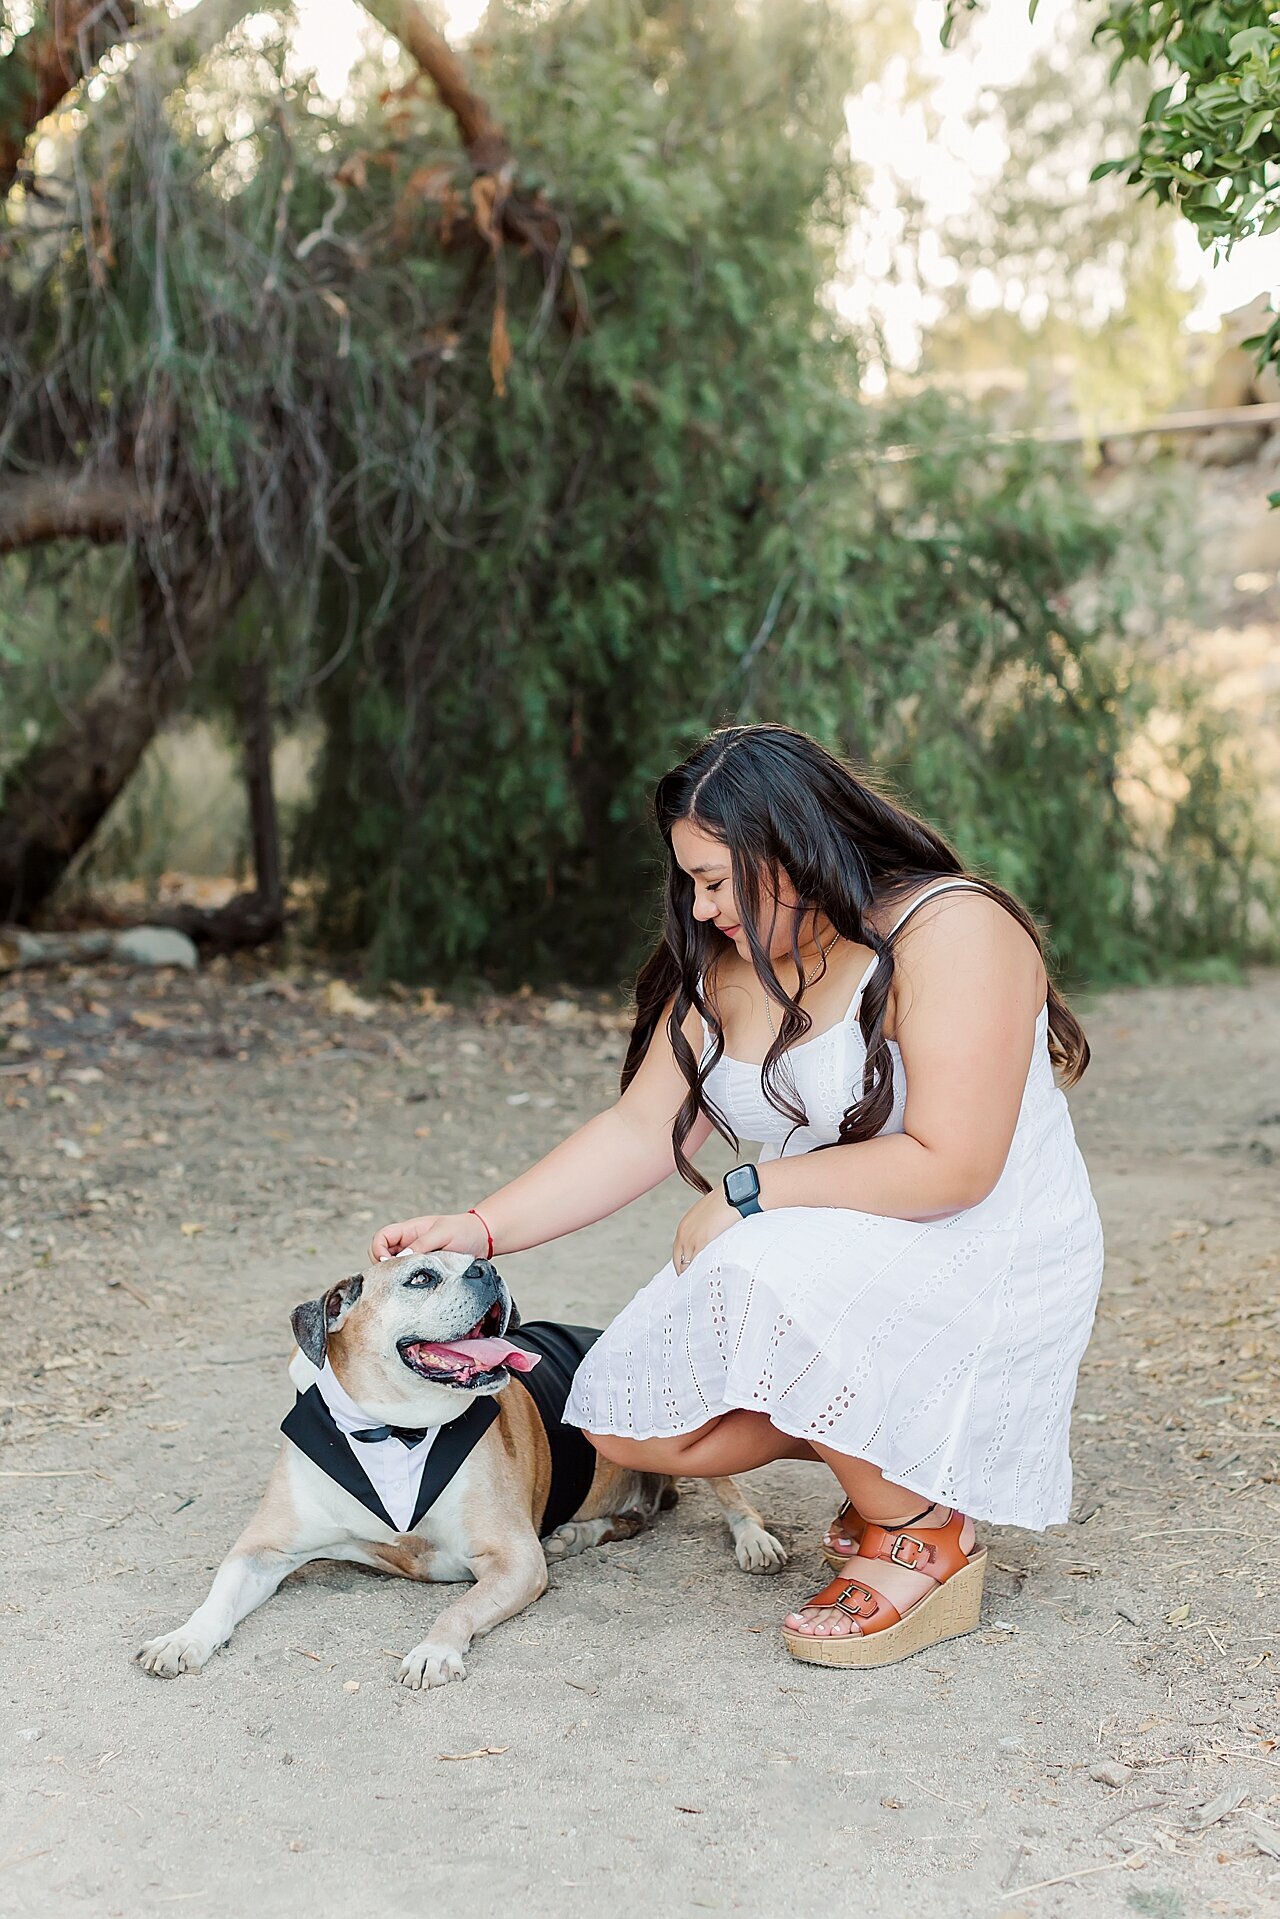 MIchelle Peterson Photography Redlands California wedding and portrait photographer_1224